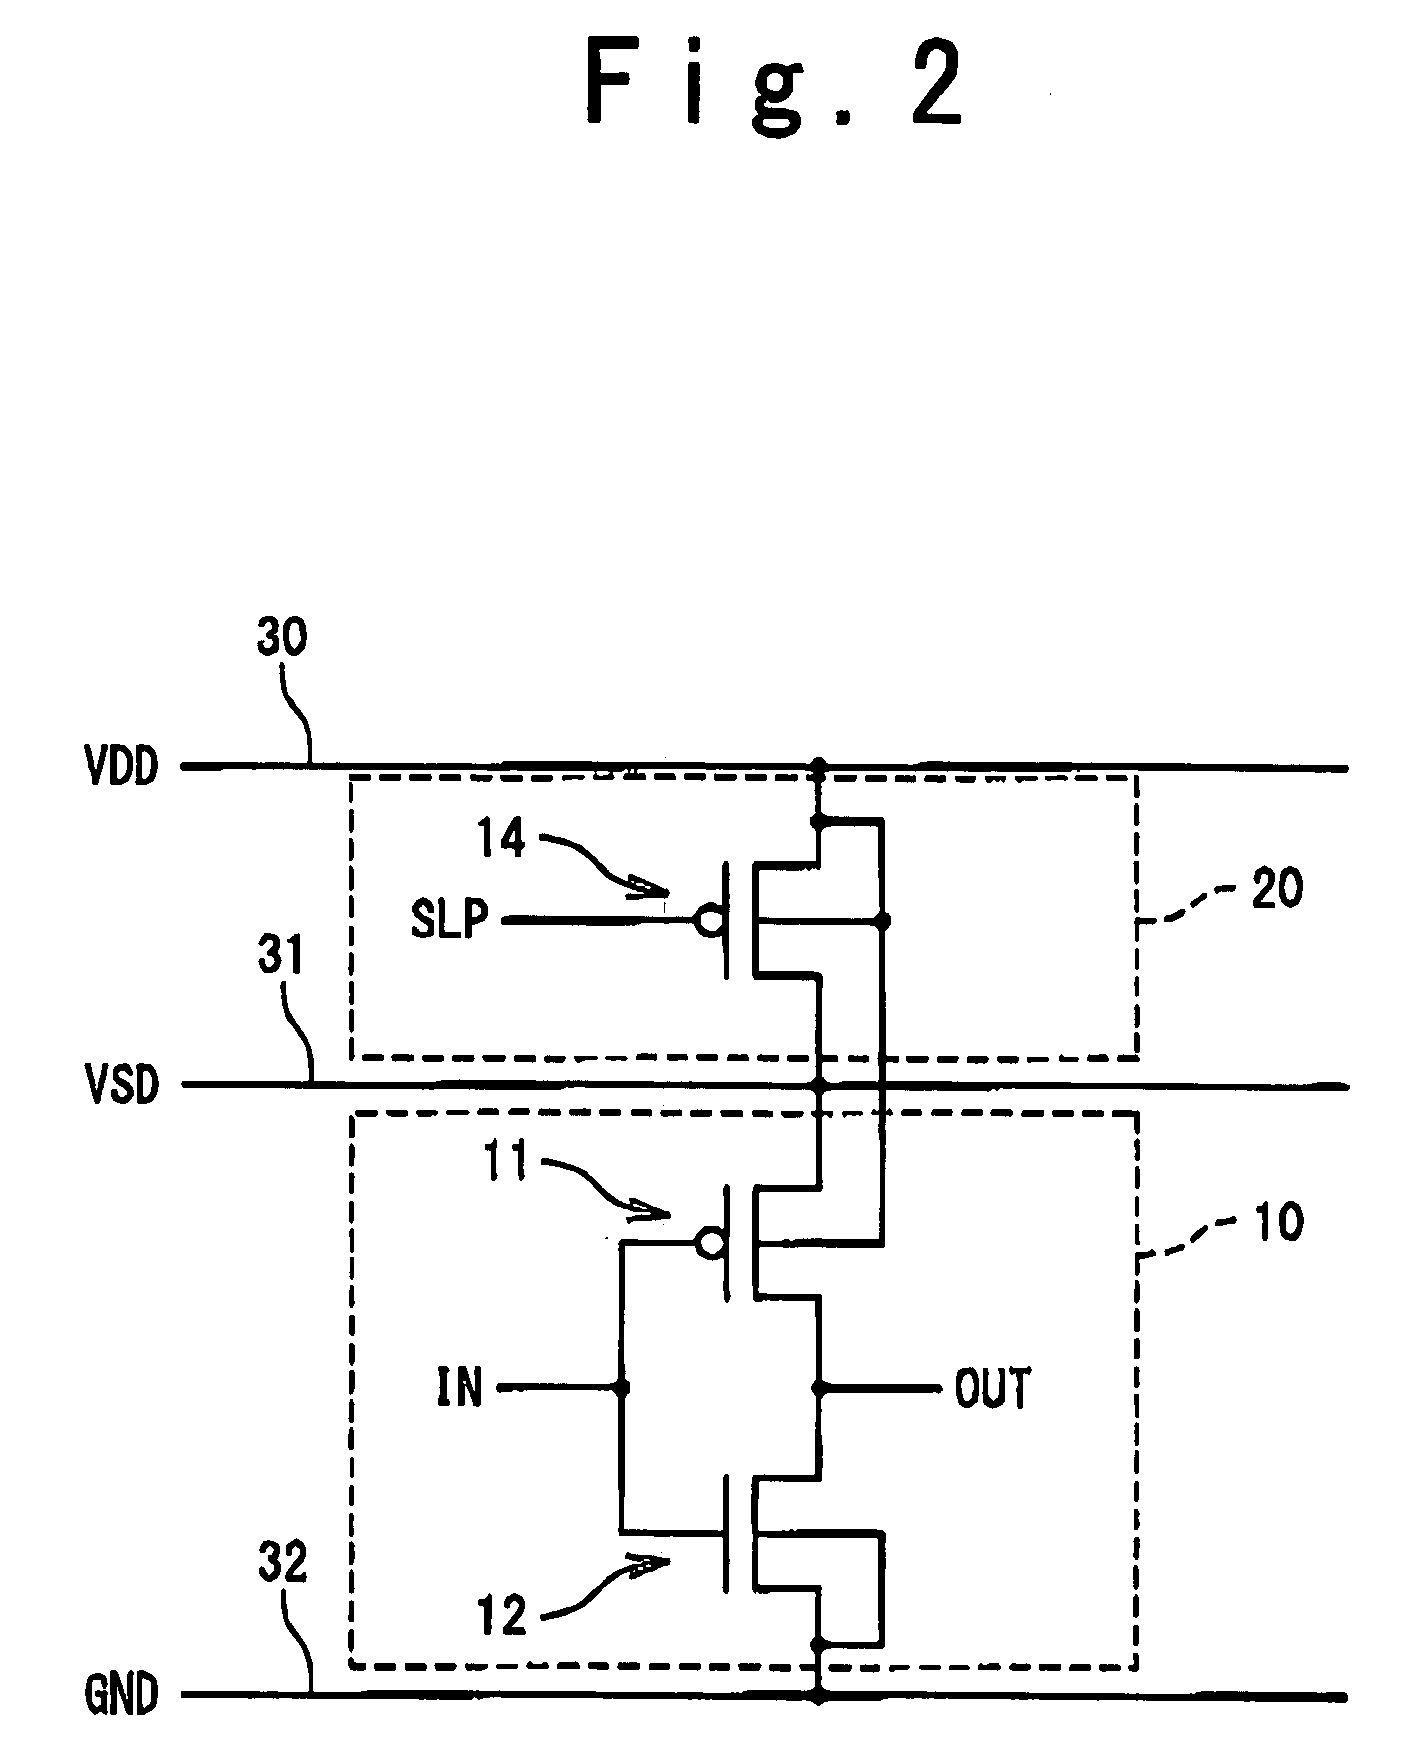 Size-reduced layout of cell-based integrated circuit with power switch